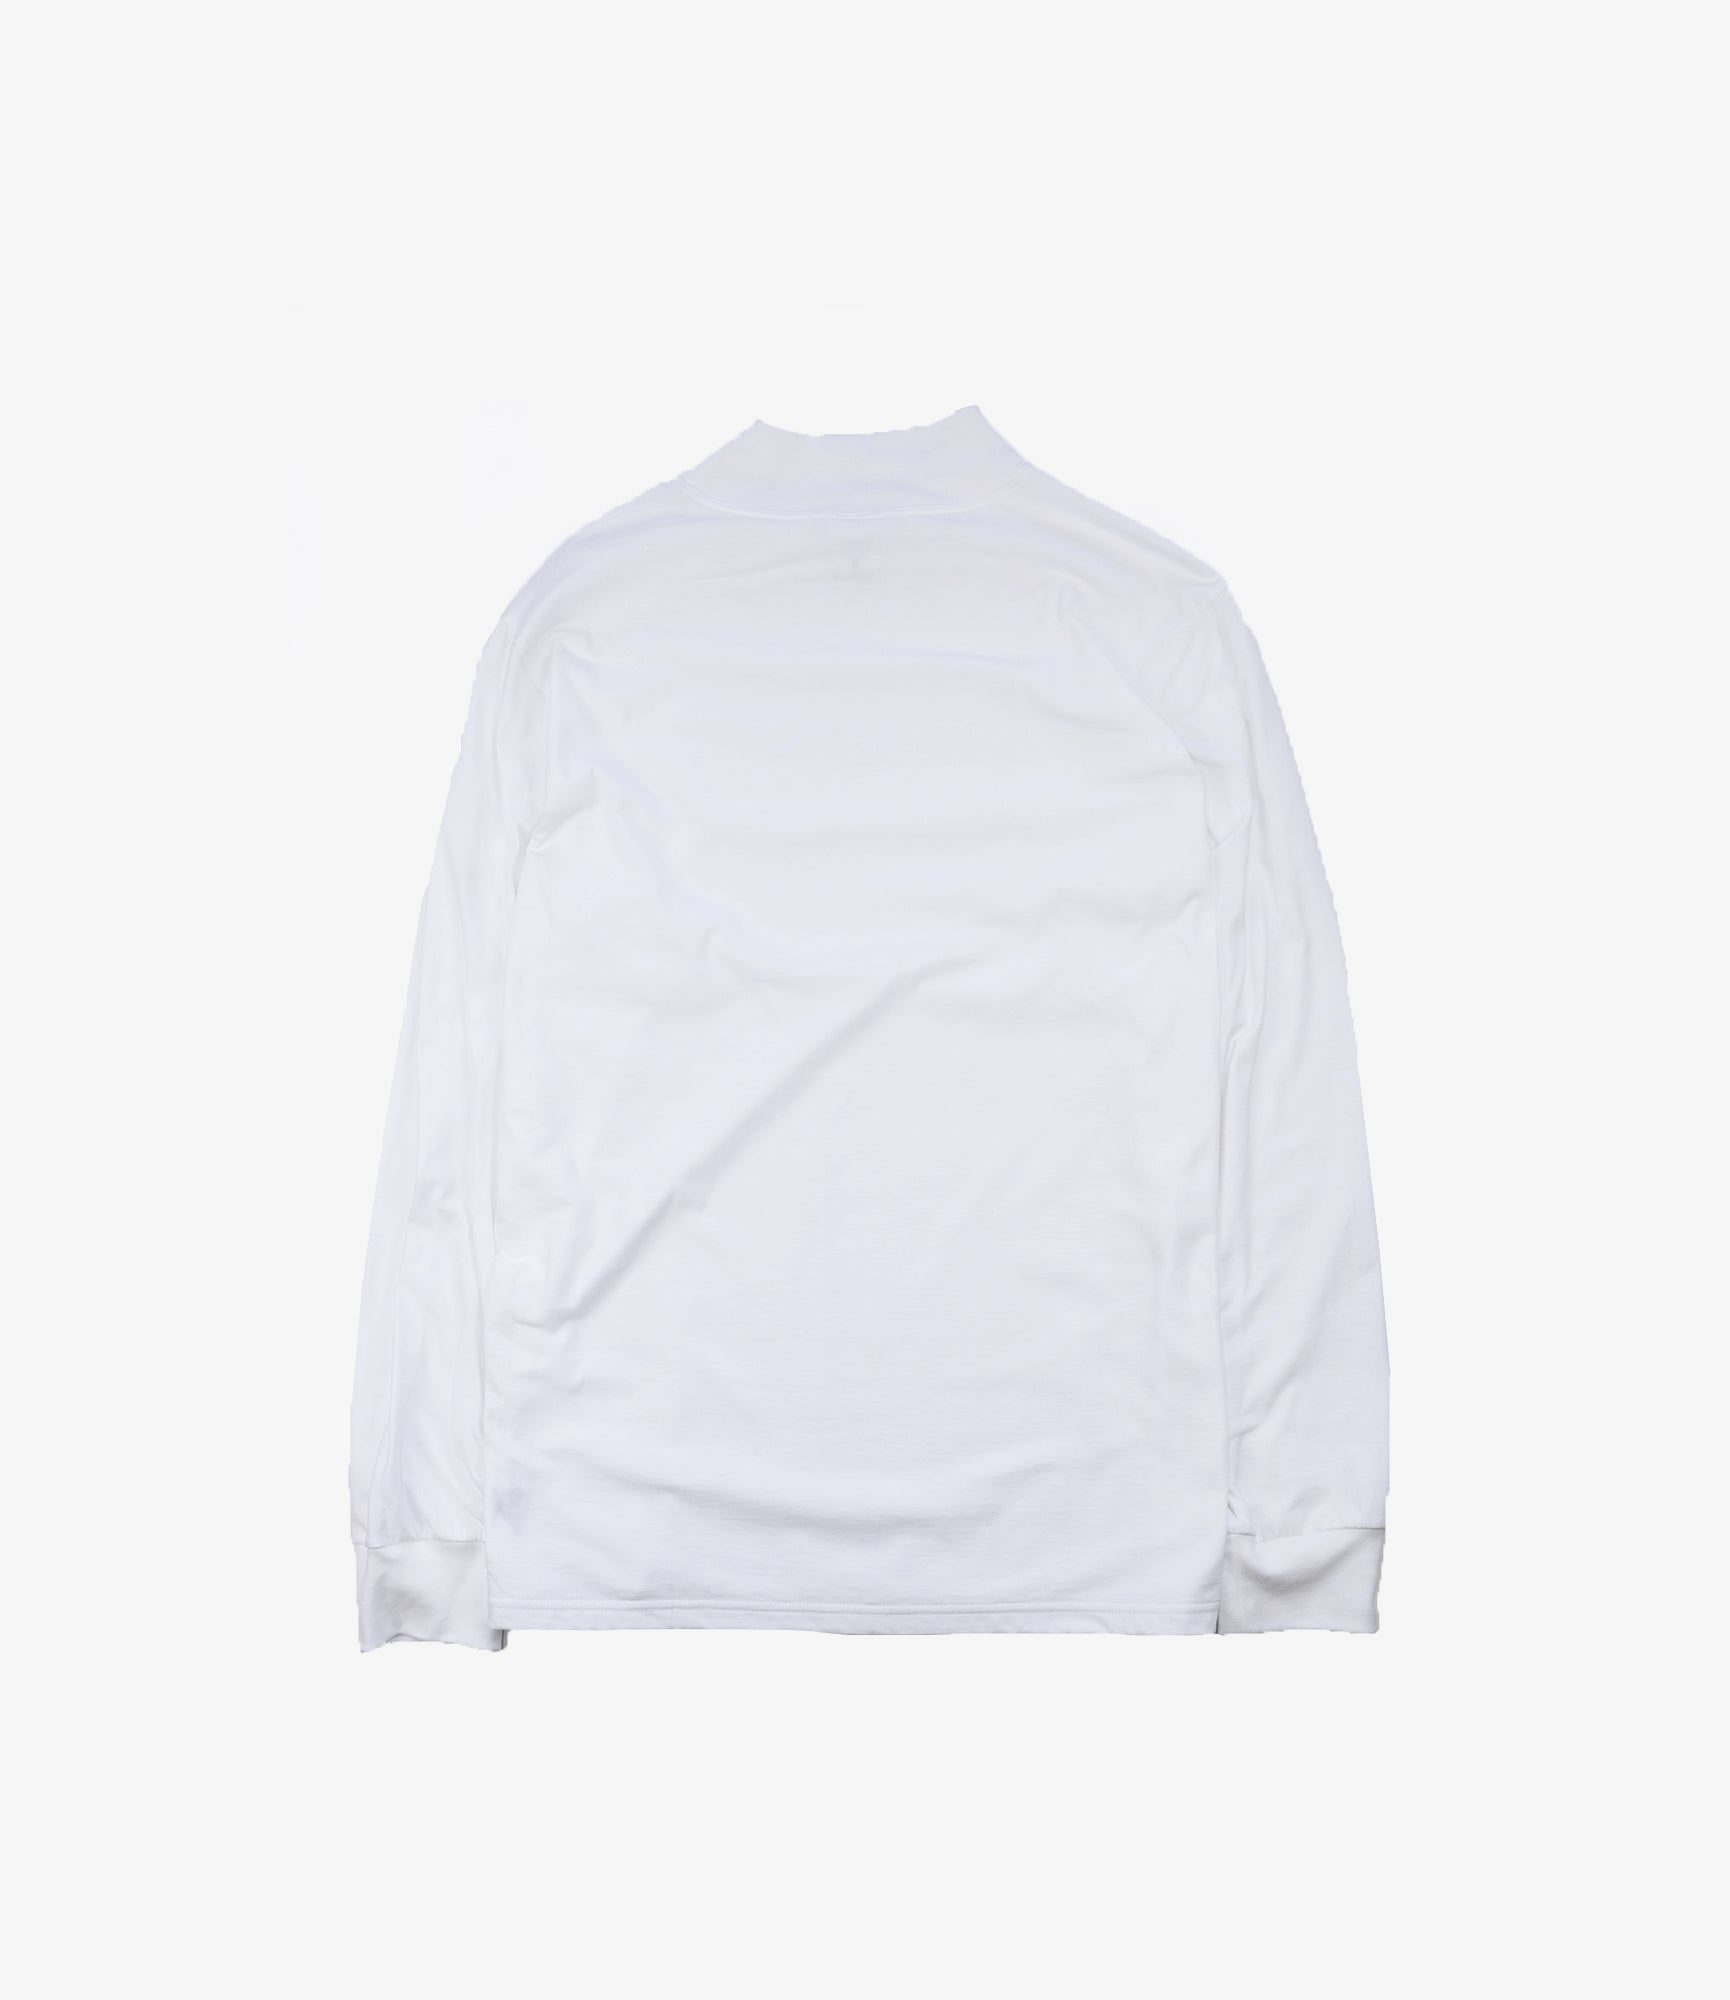 South2 West8 L/S Mock Neck Tee - Cordura Jersey - White